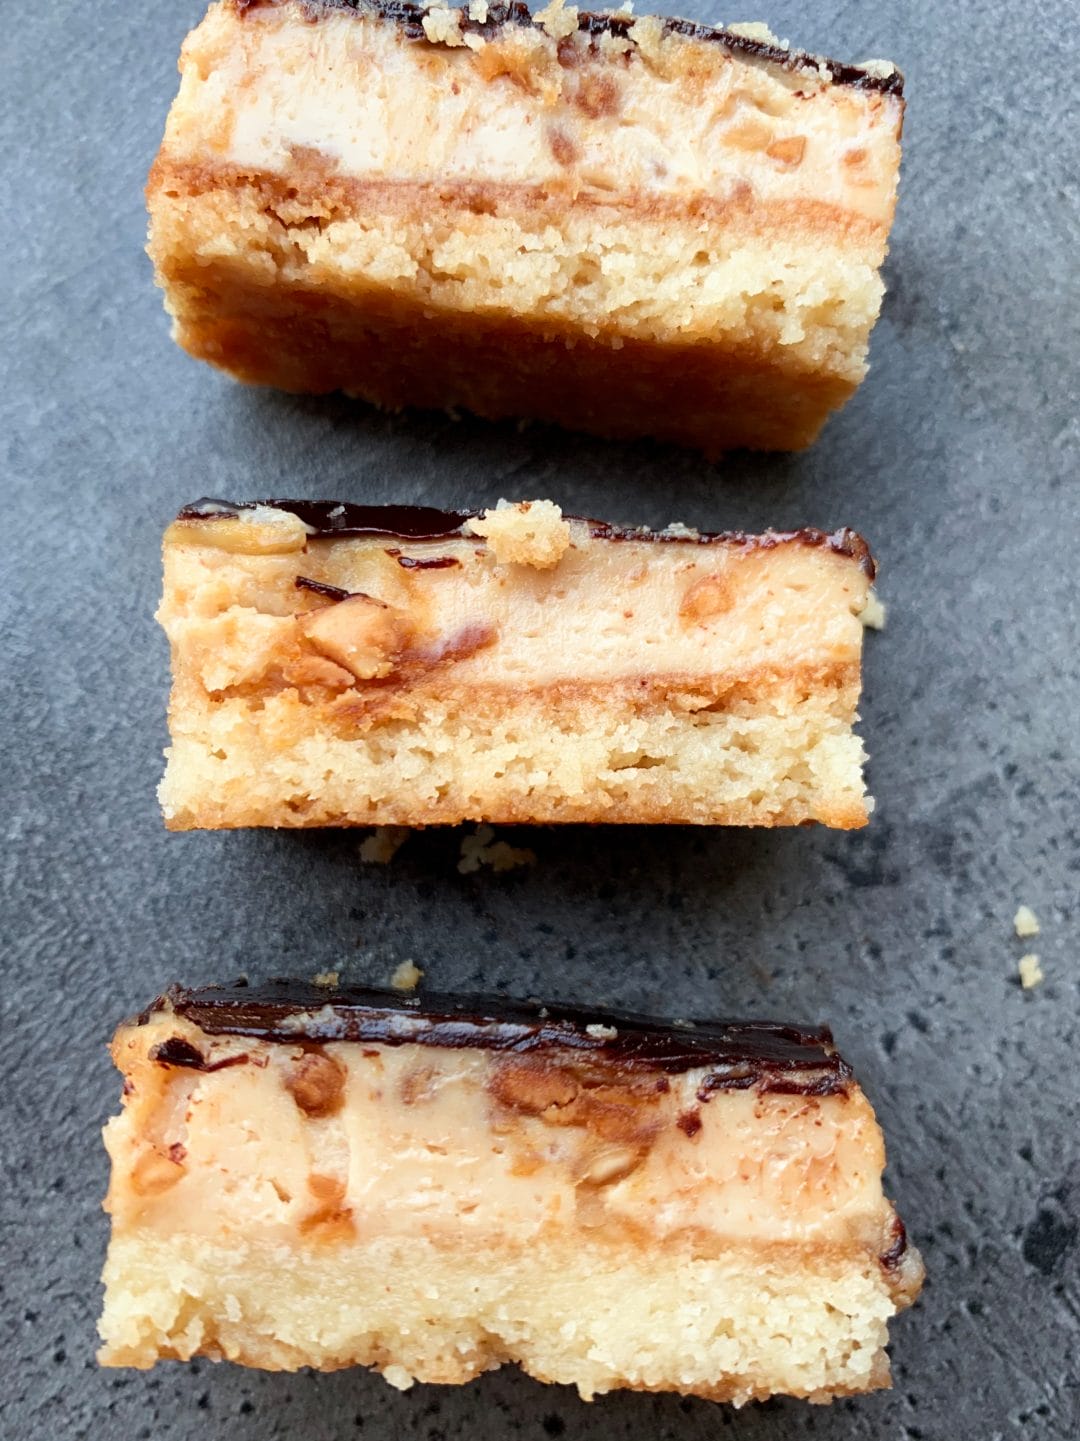 Picture of keto peanut butter cheesecake bars with crispy crust of almonds and coconut flour